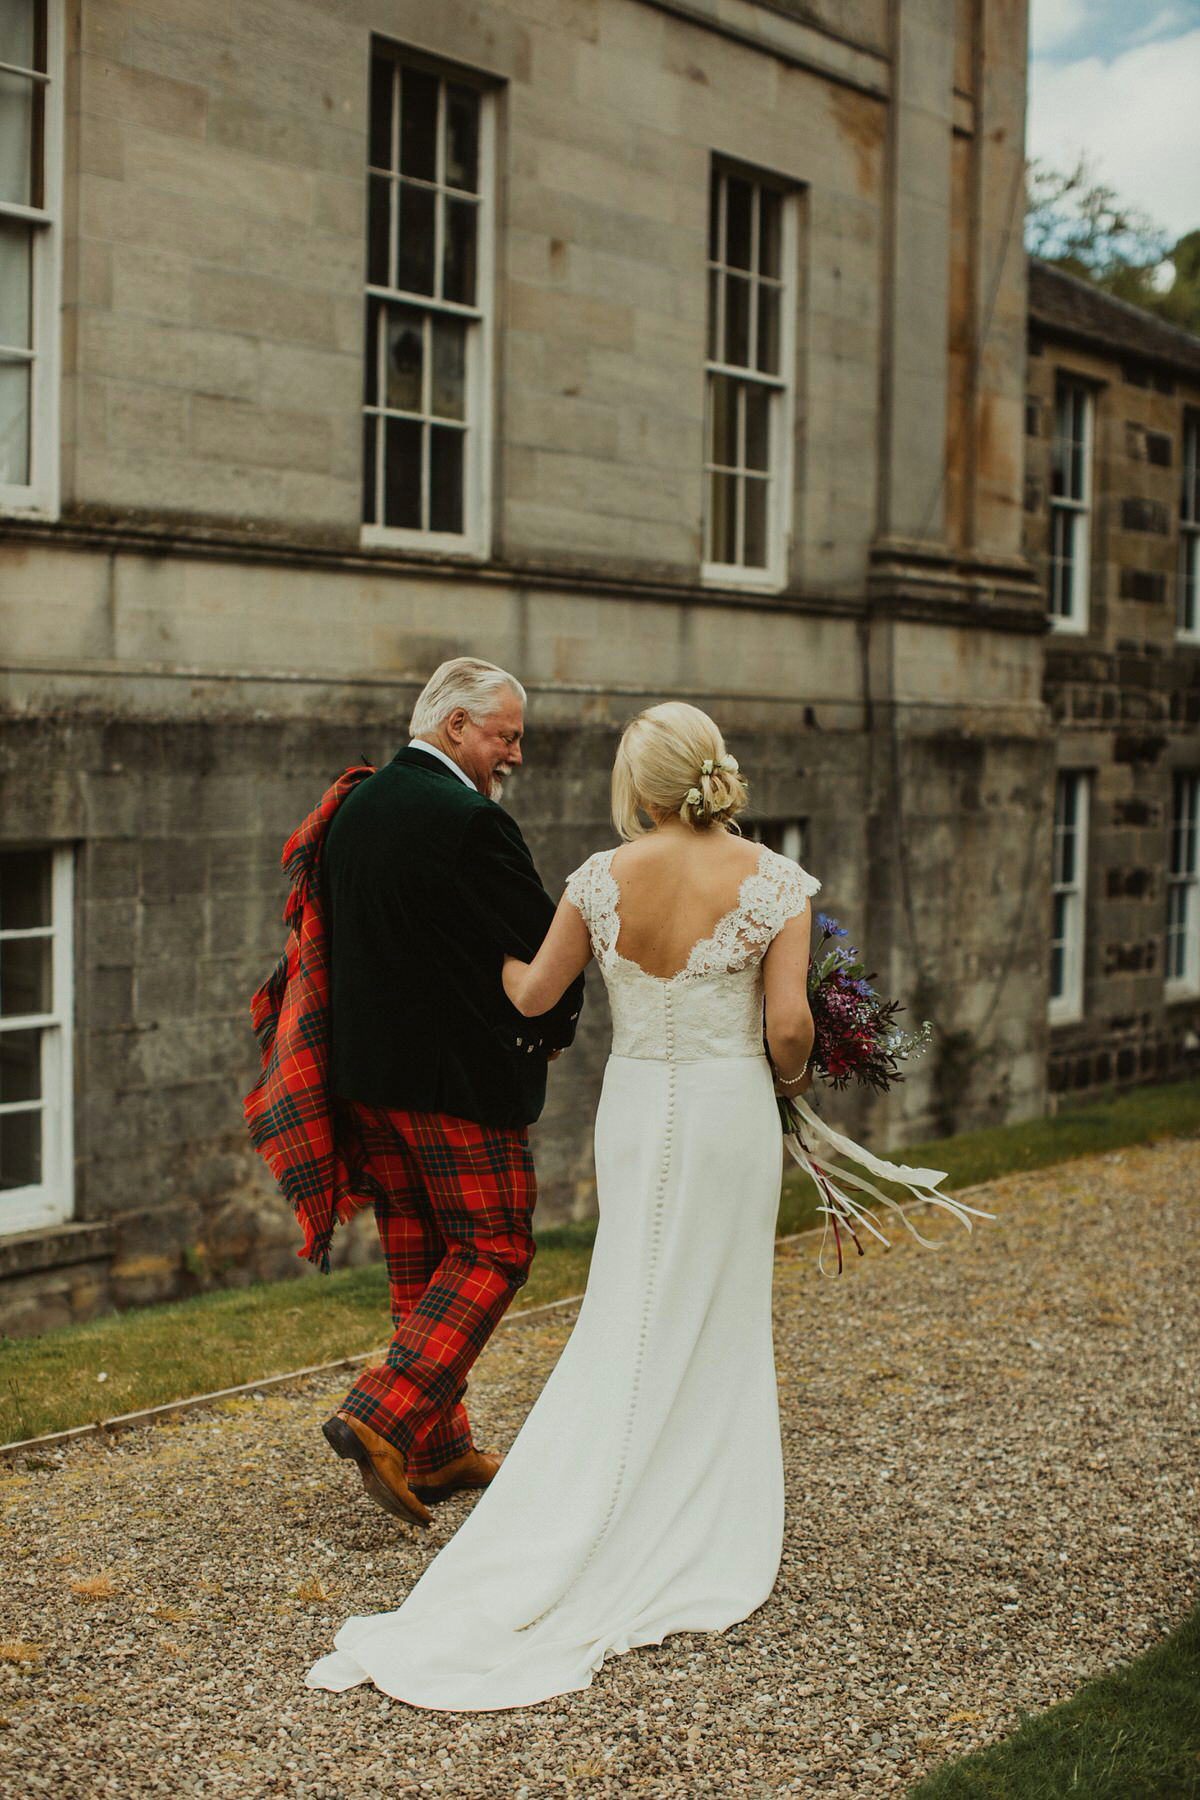 Nicola wears a Stewart Parvin gown for her elegant and romantic 'joining of the clans' inspired Scottish wedding. Photography by The Curries.